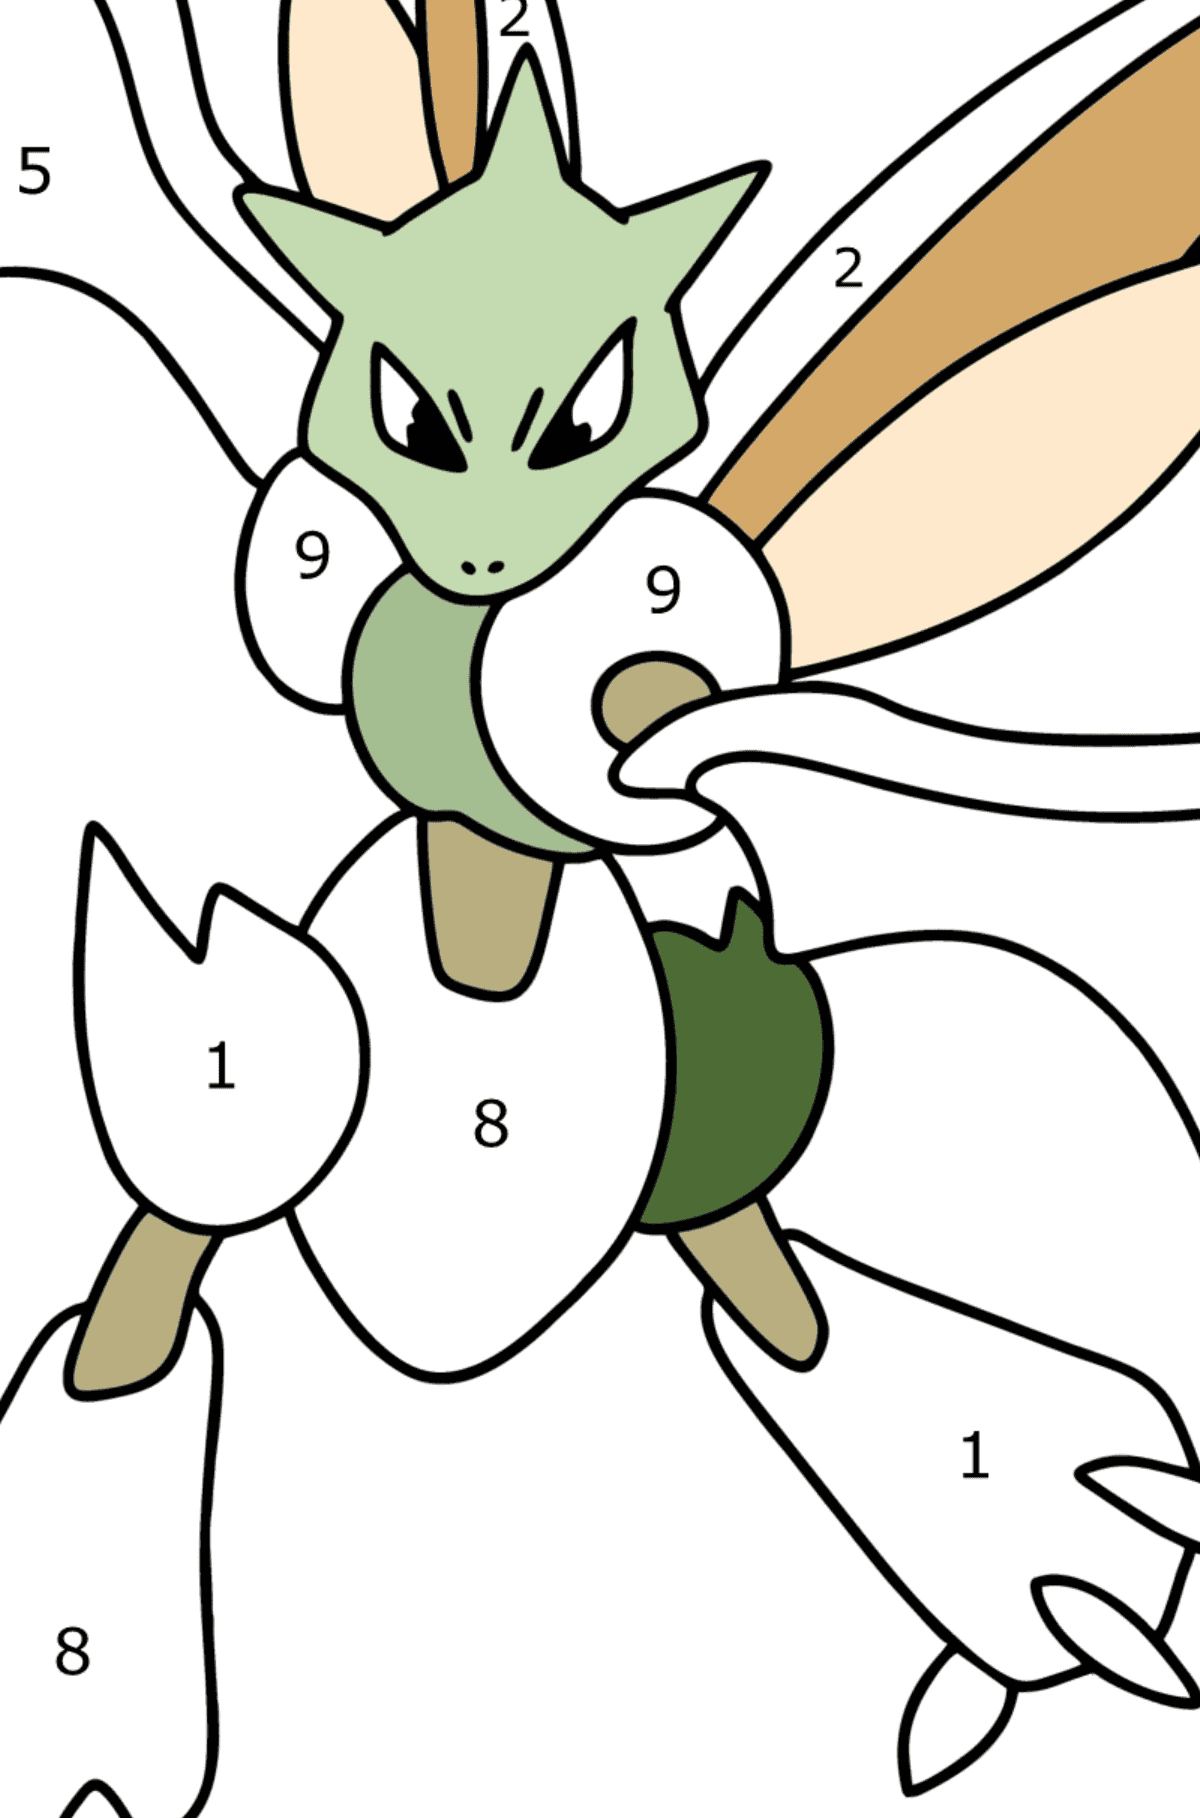 Coloring page Pokemon Go Scyther - Coloring by Numbers for Kids